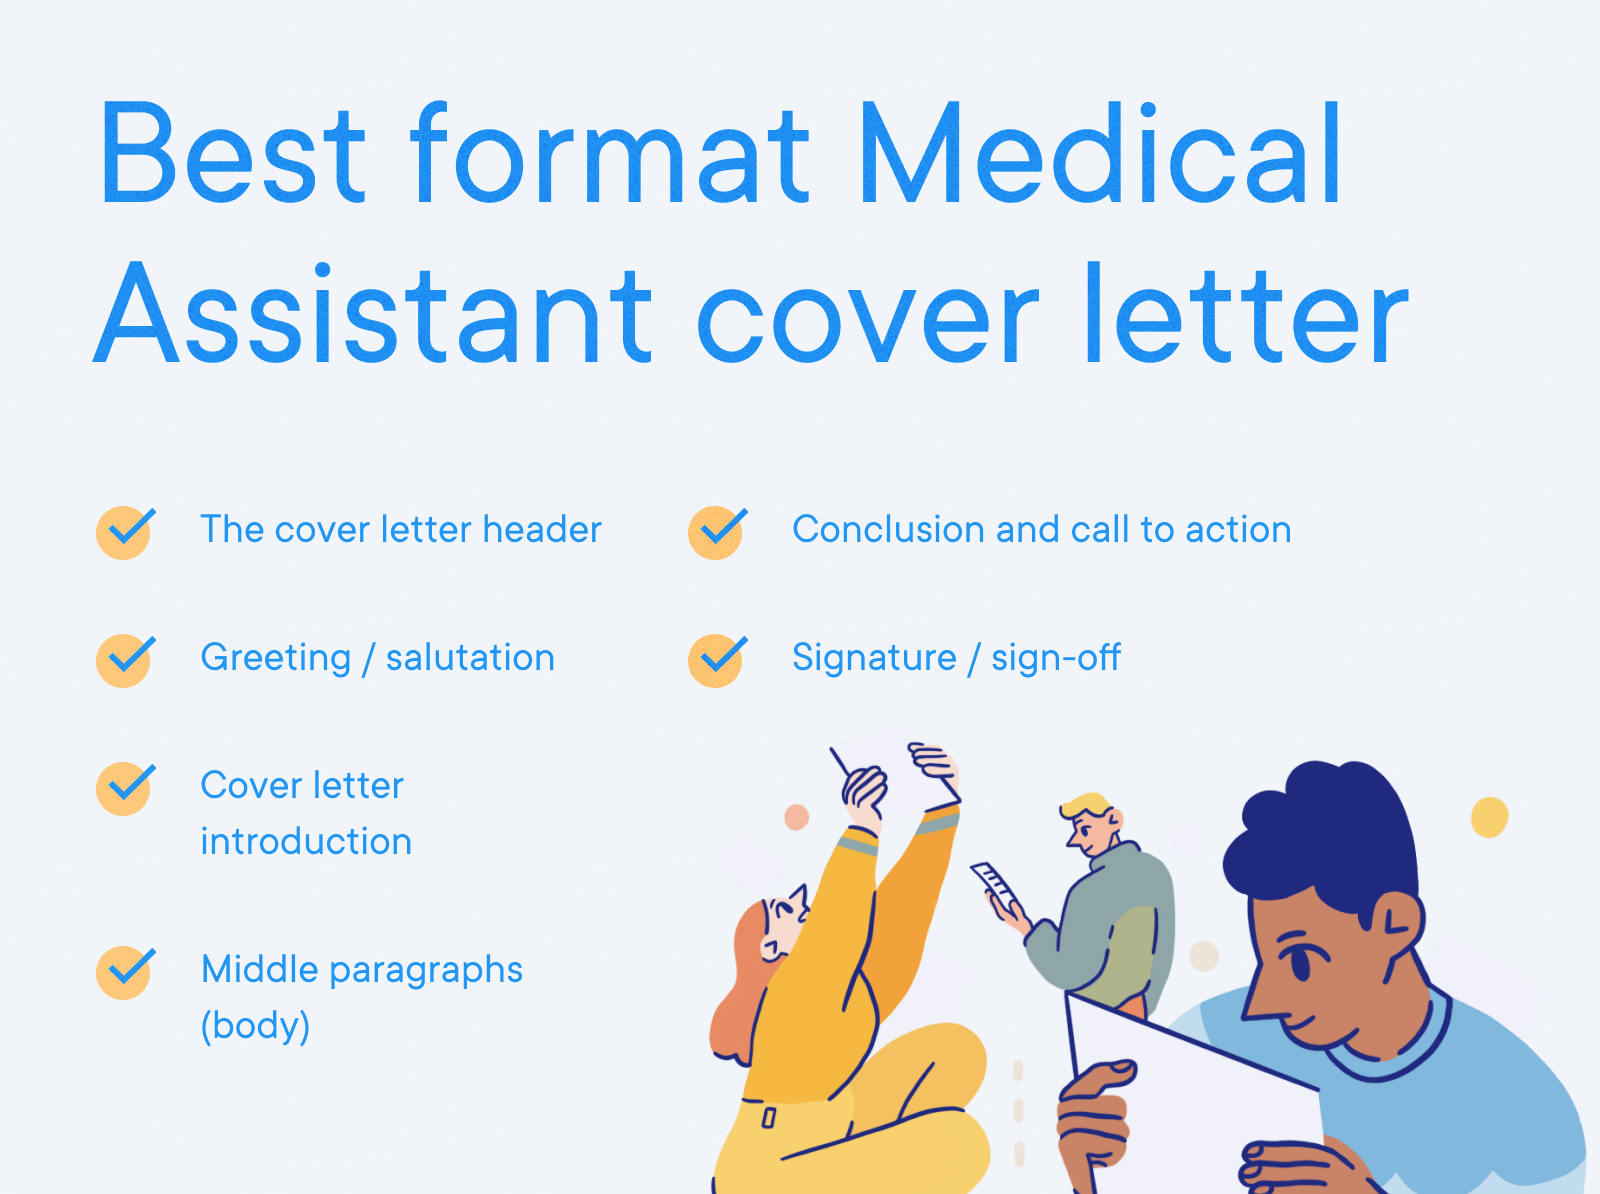 Medical Assistant Cover Letter Example - Best format Medical Assistant cover letter